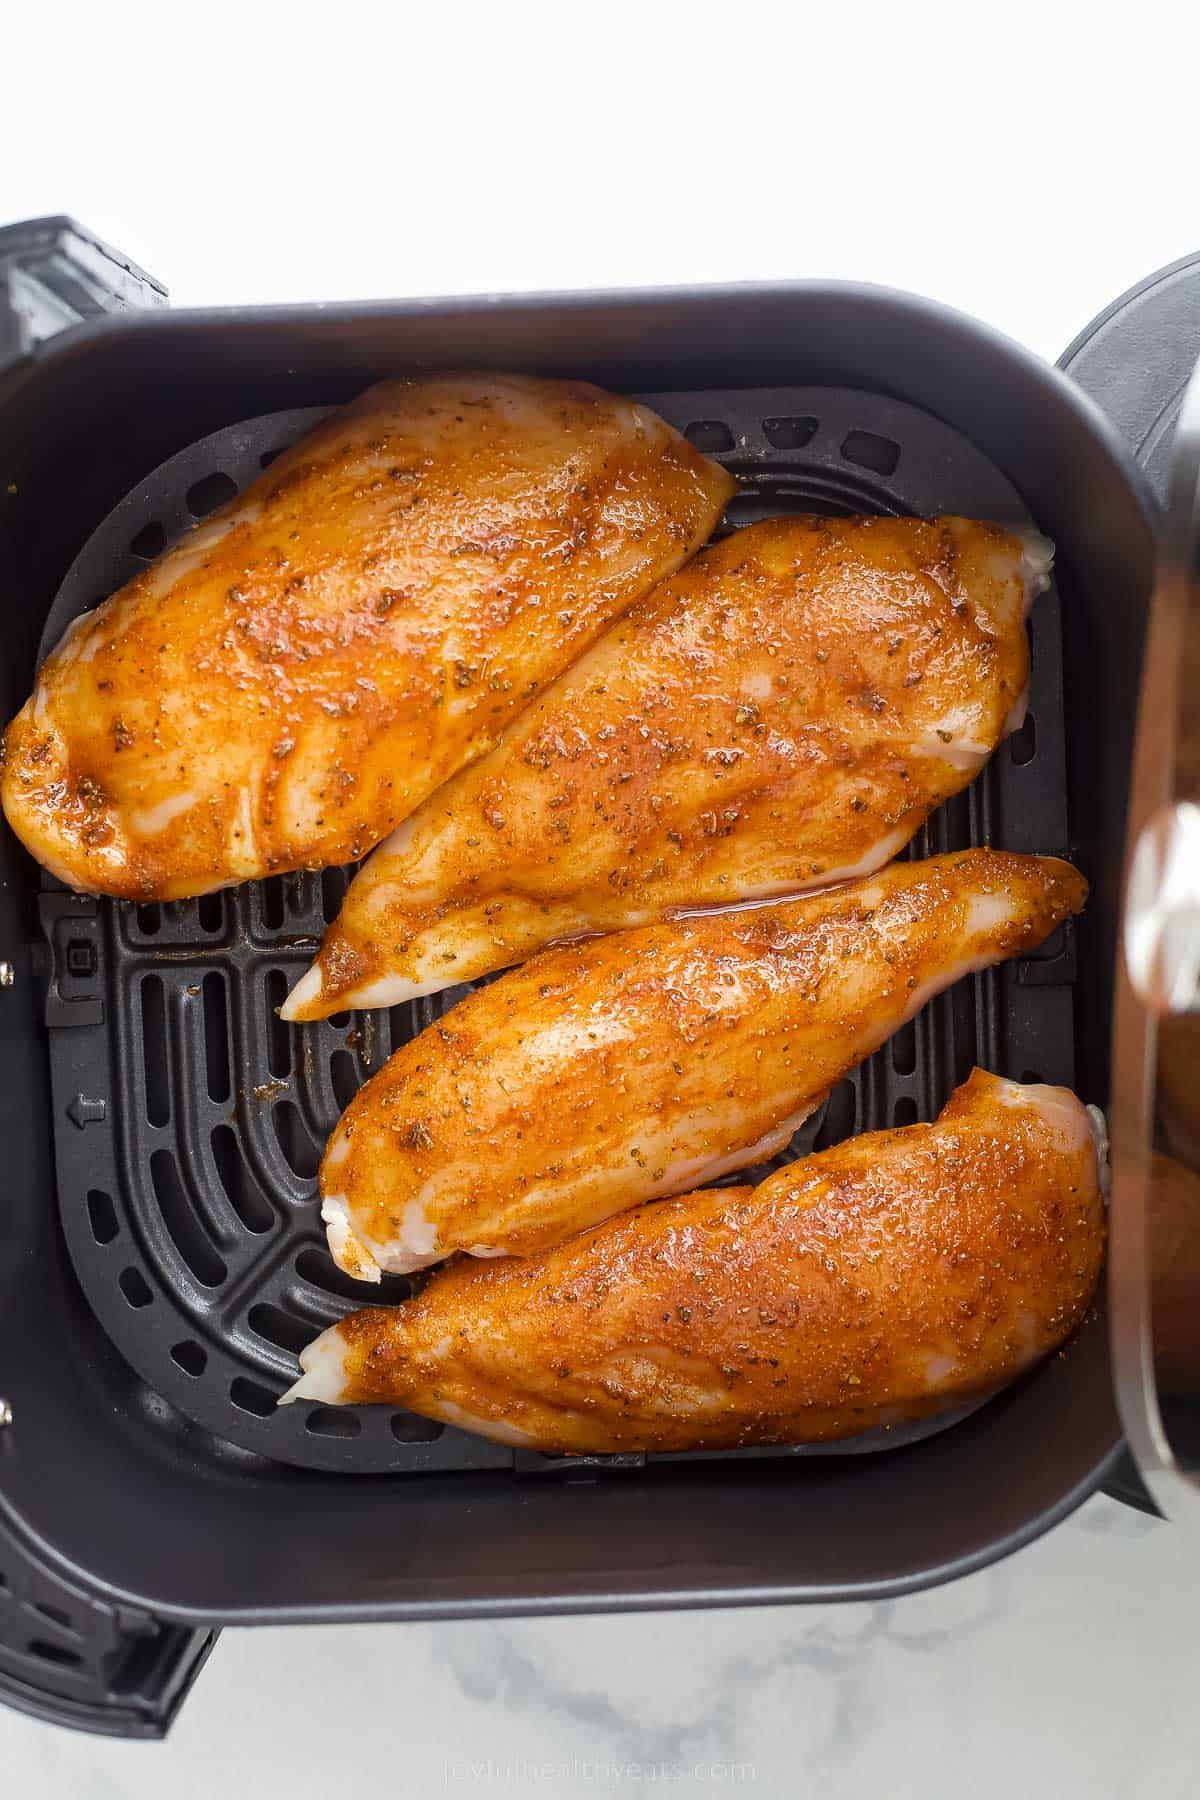 uncooked chicken ،s in an air fryer